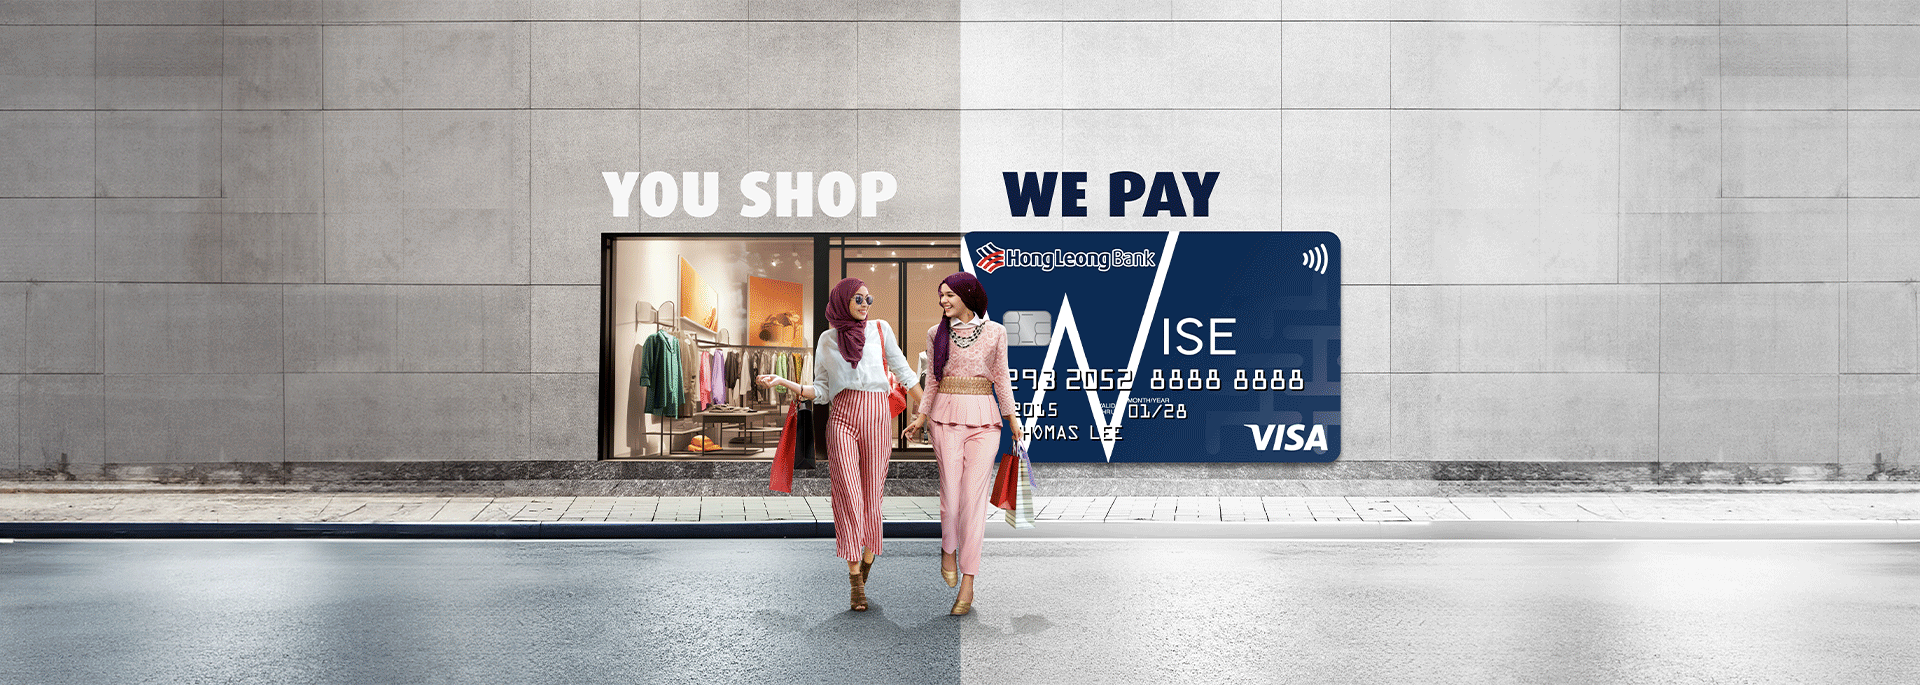 Treat yourself and be treated by us. Have up to RM10,000 of your credit card bill* paid by us!